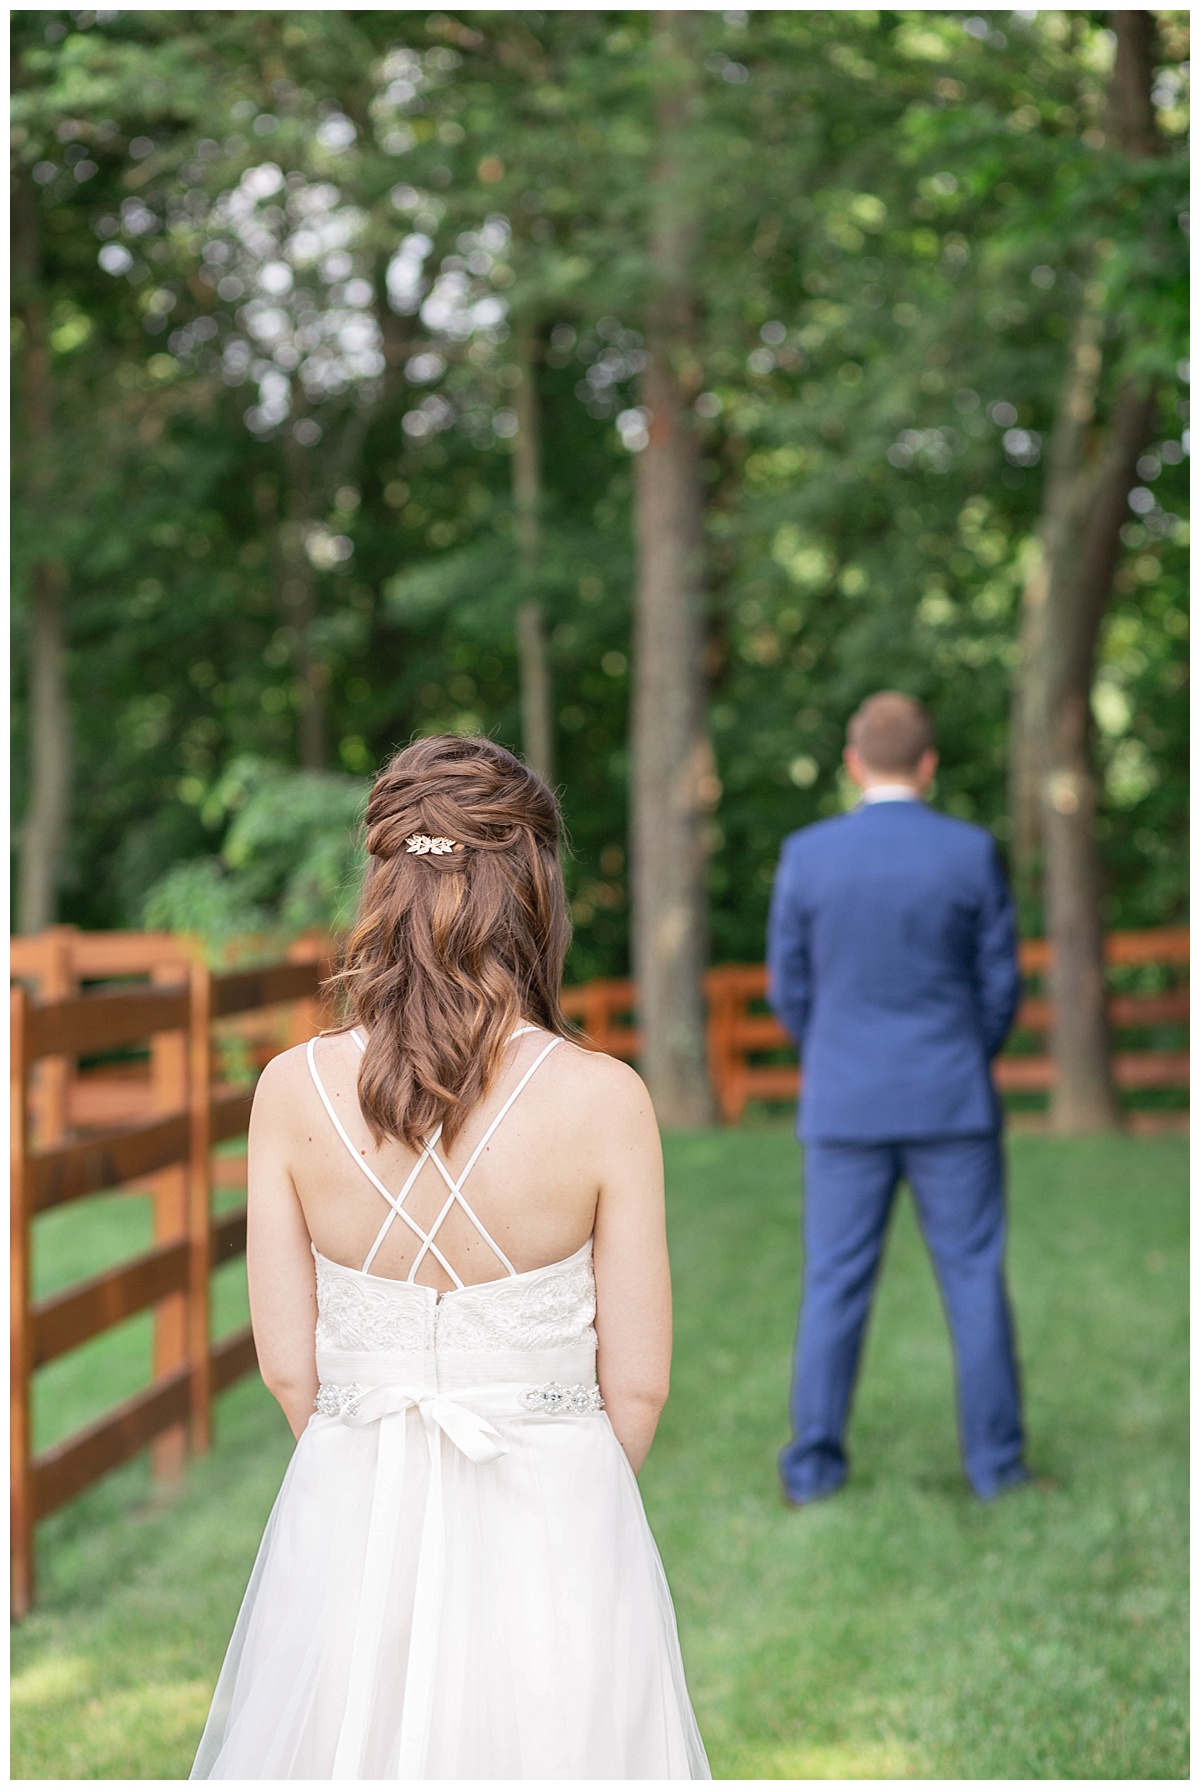 Old Blue Rooster Event Center Wedding, Columbus Ohio Outdoor Barn Wedding | Monica Brown Photography | Indianapolis Wedding Photographer 